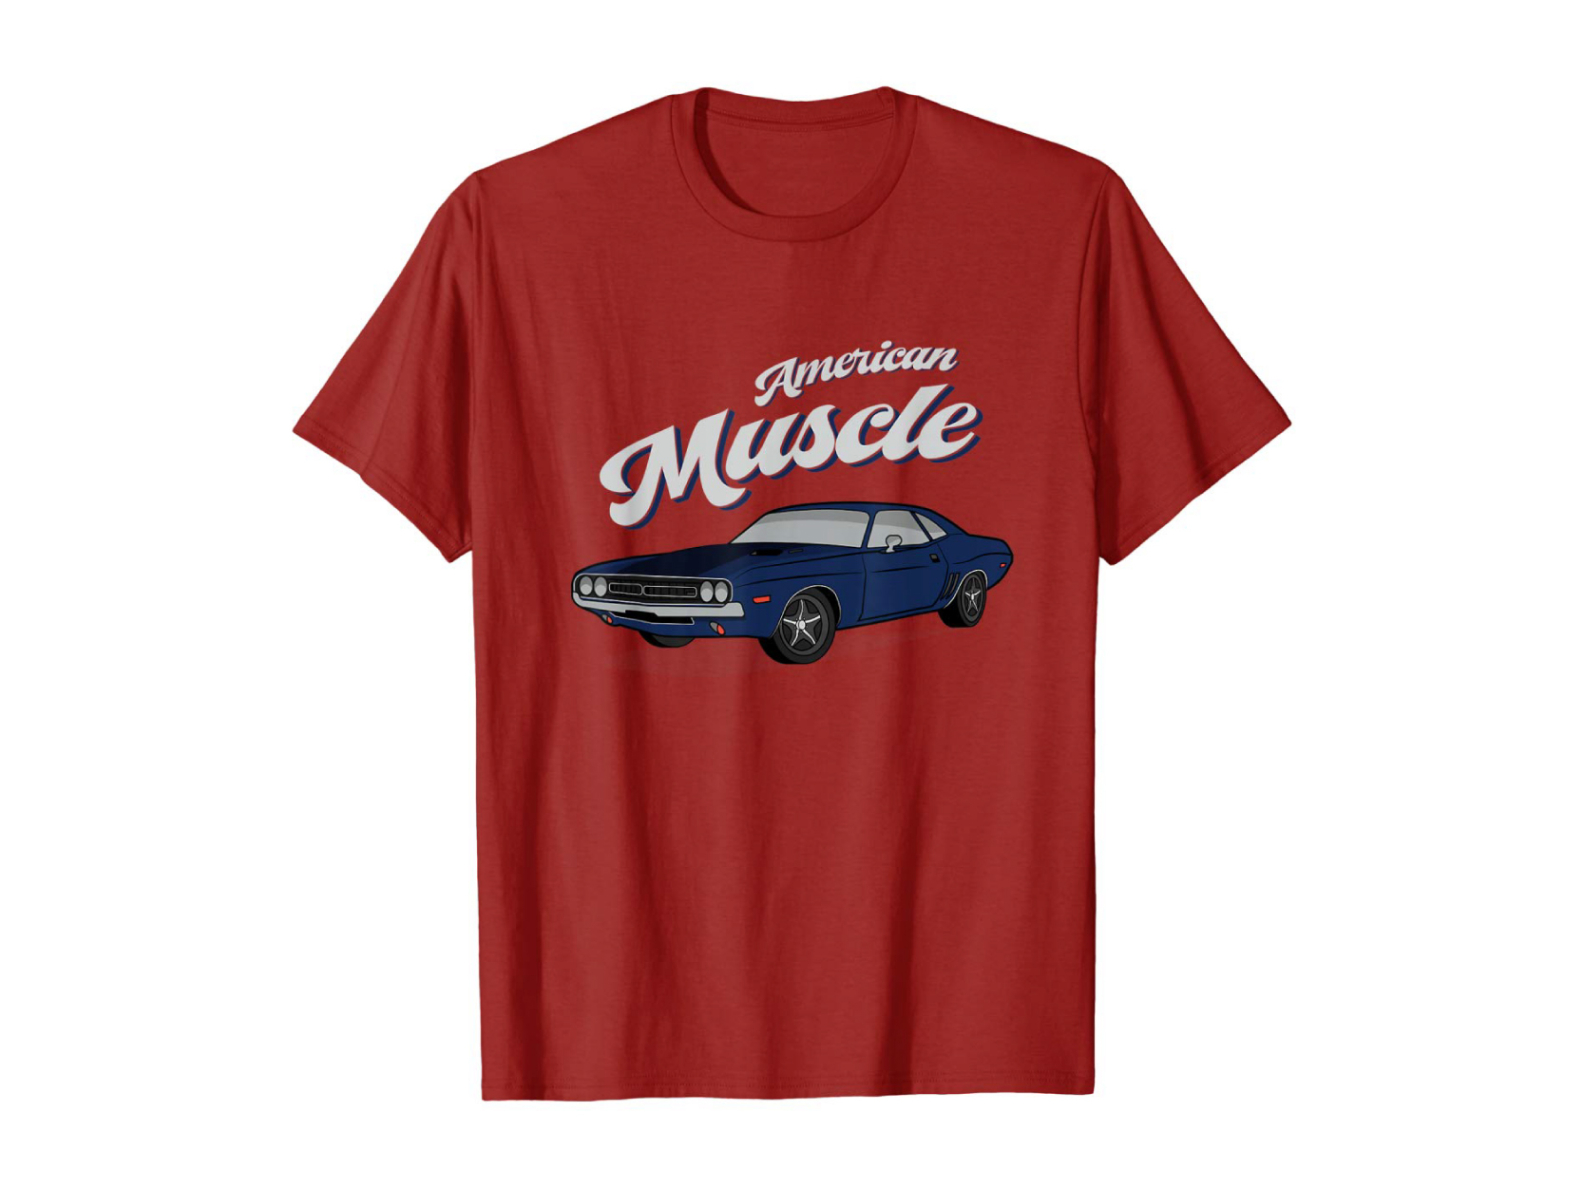 American Muscle Car 60s 70s Vintage T-Shirt by MadeByBono on Dribbble